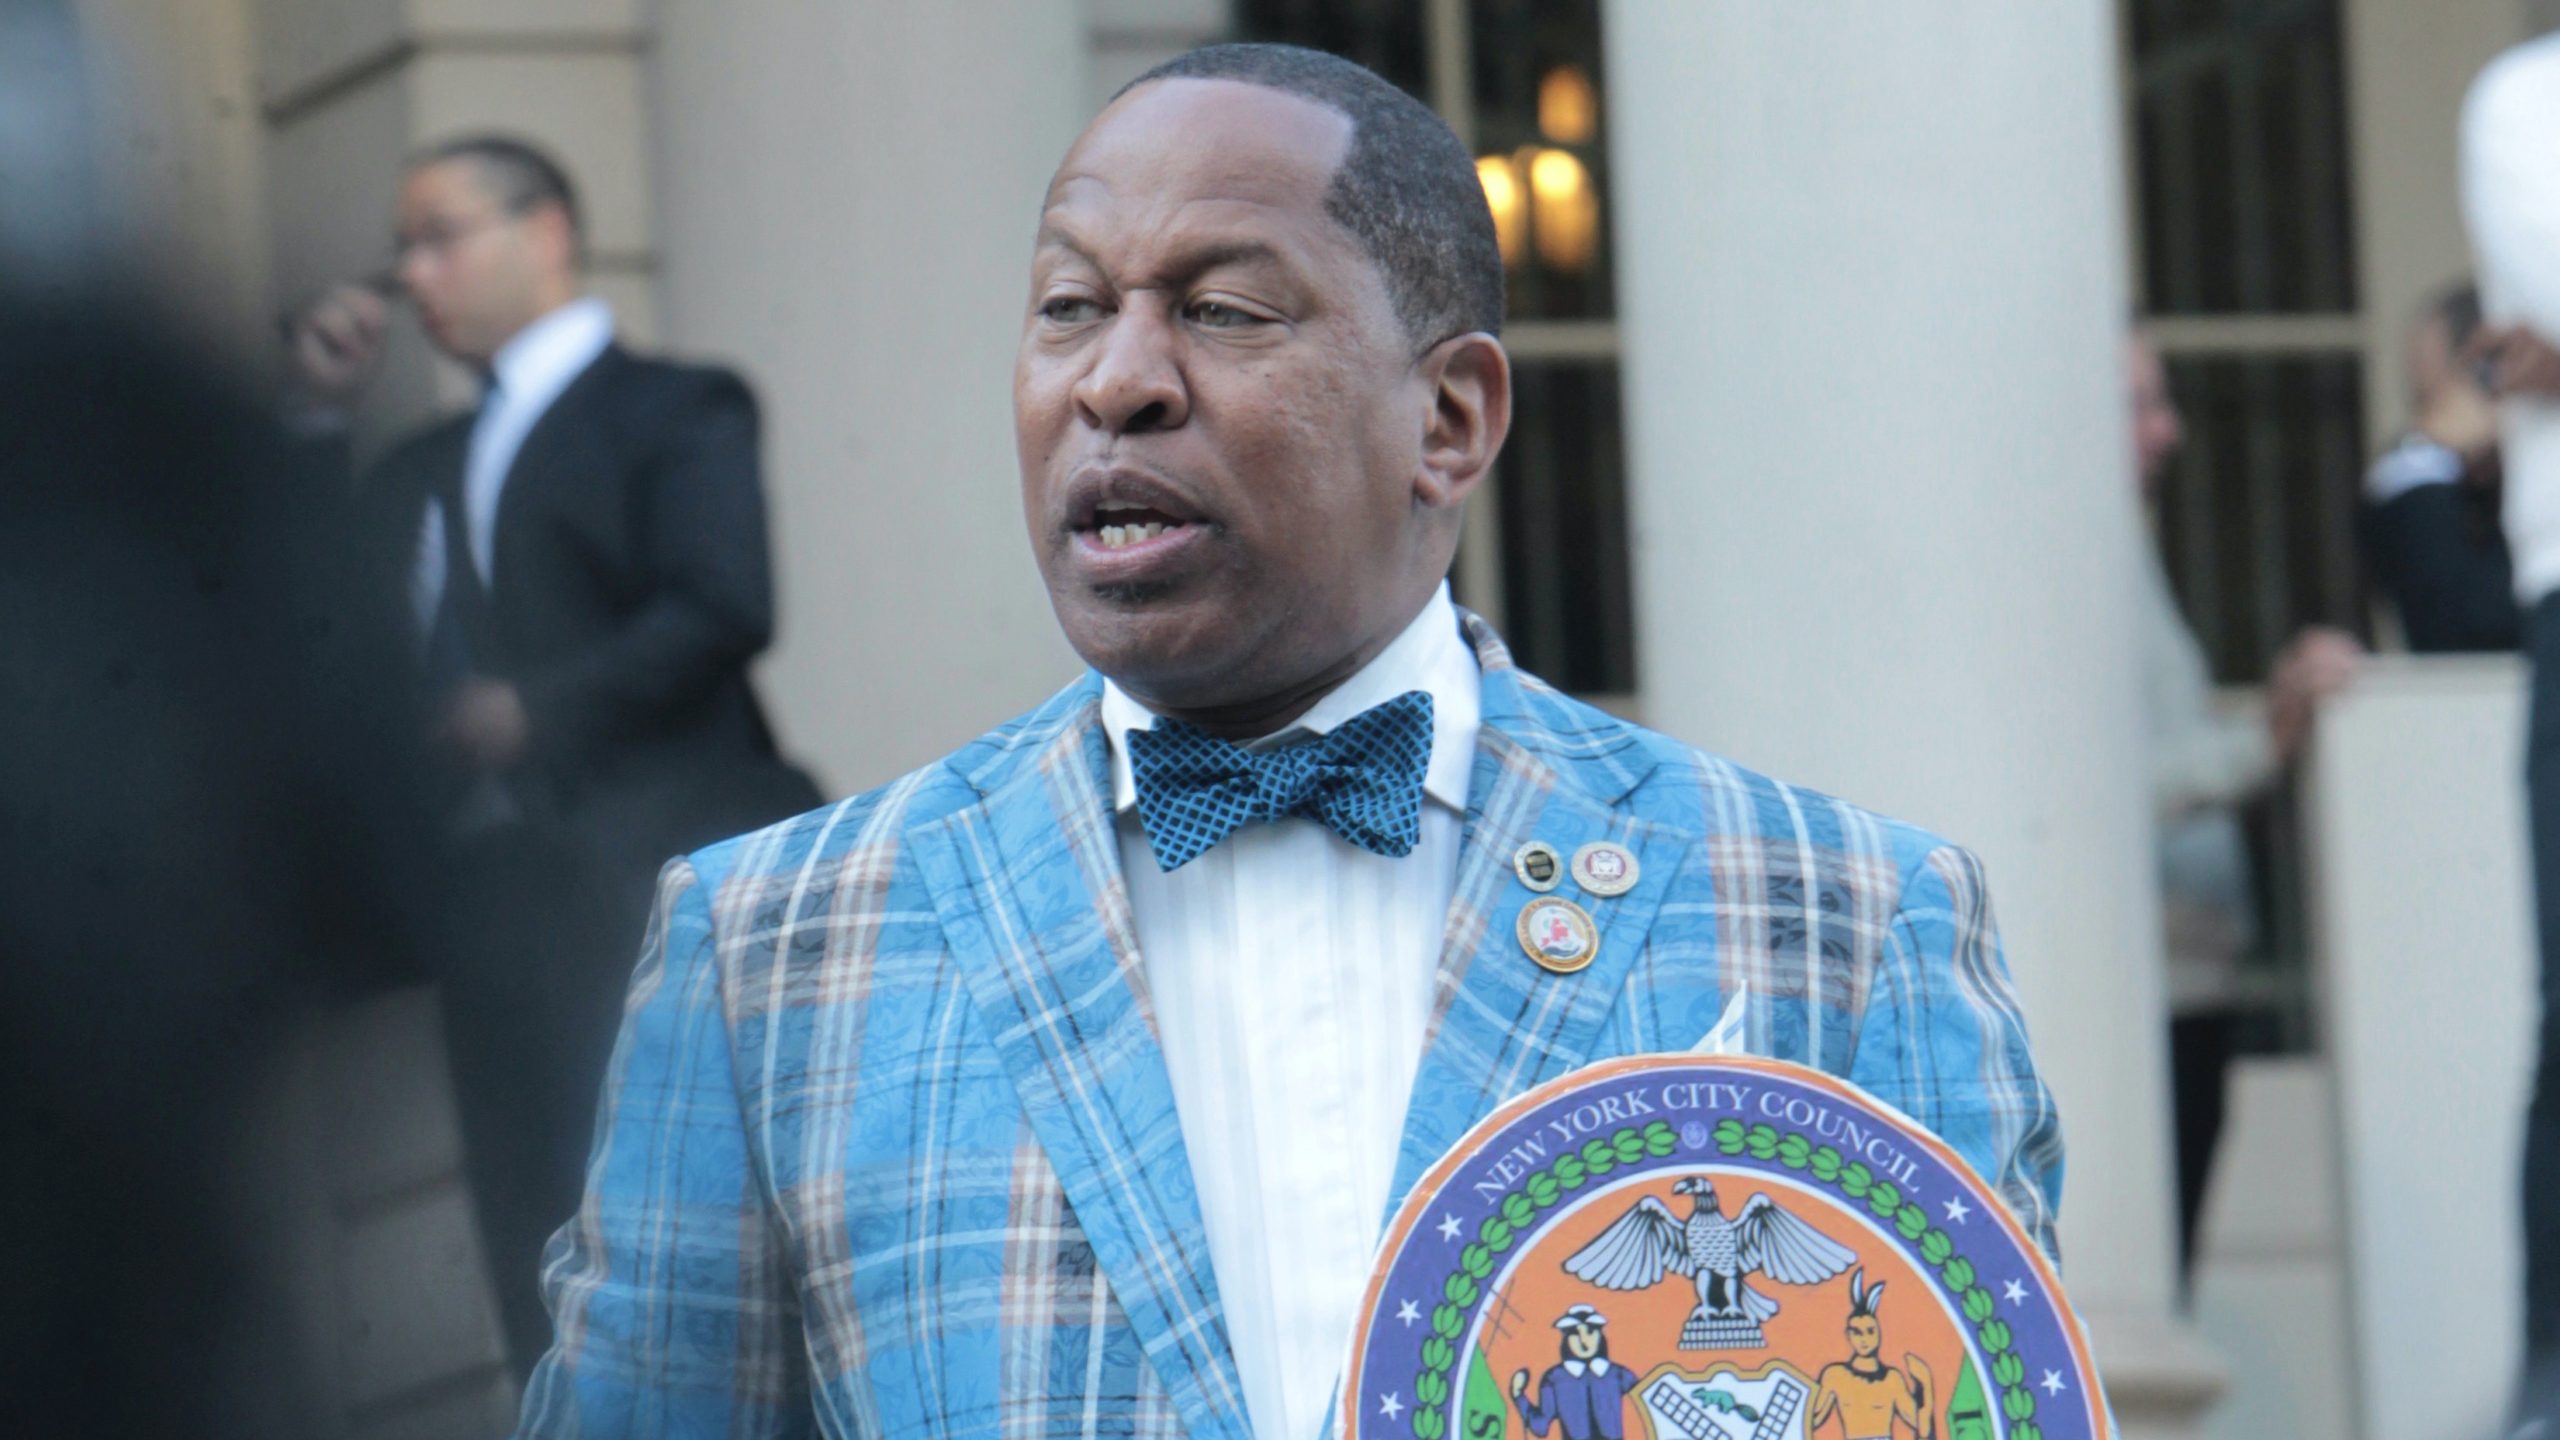 NYC councilman out after union-related ethics violations